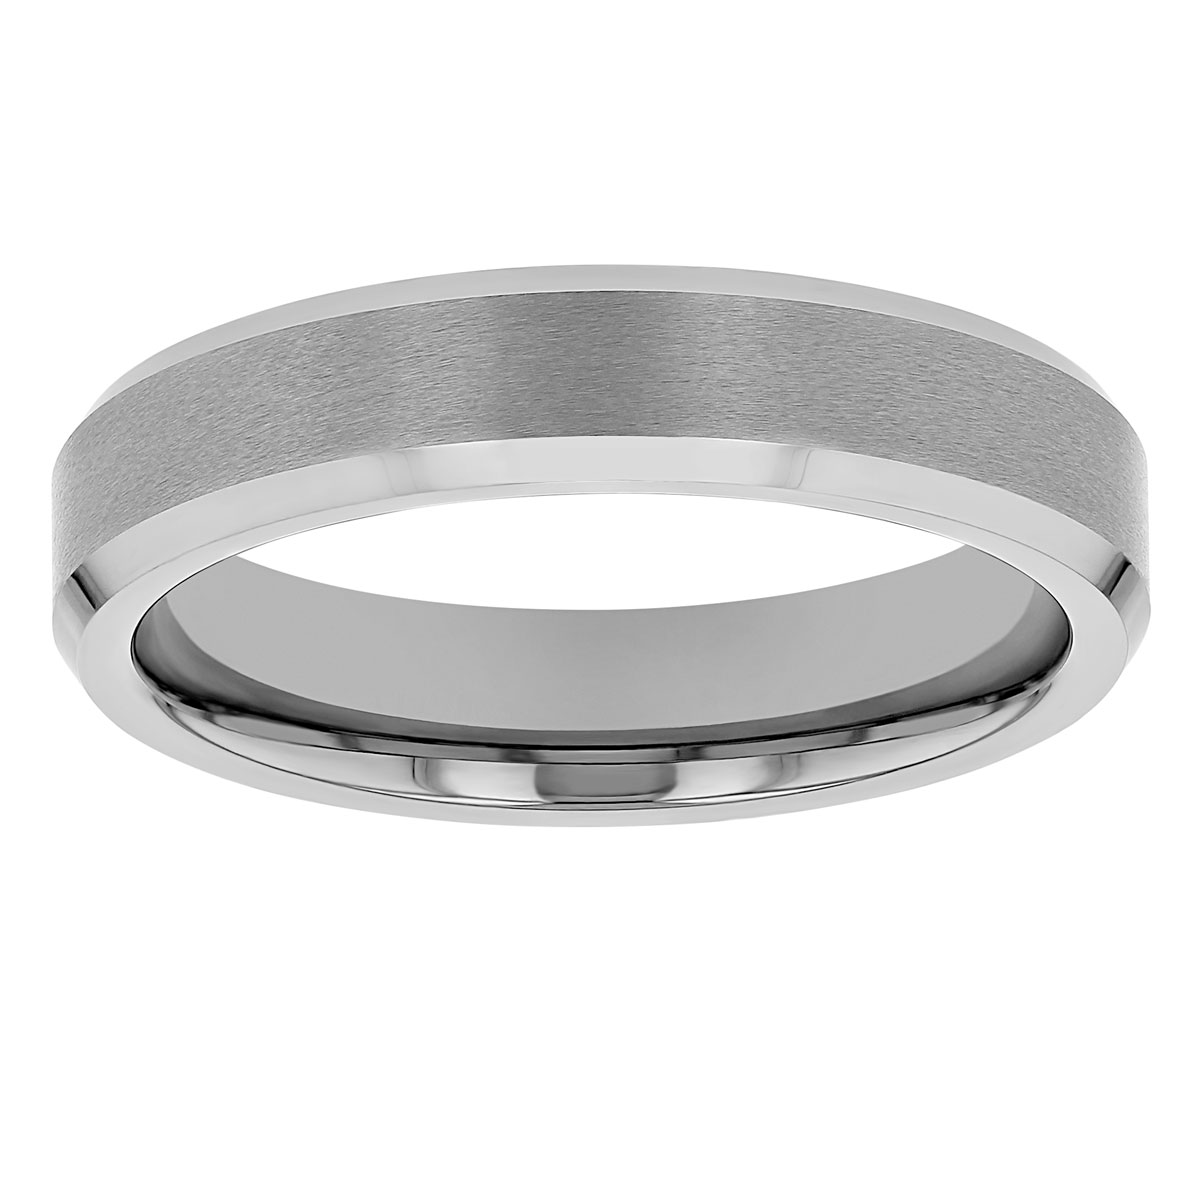 White Tungsten Comfort Fit 5 mm Satin Wedding Band with Beveled Edges ...